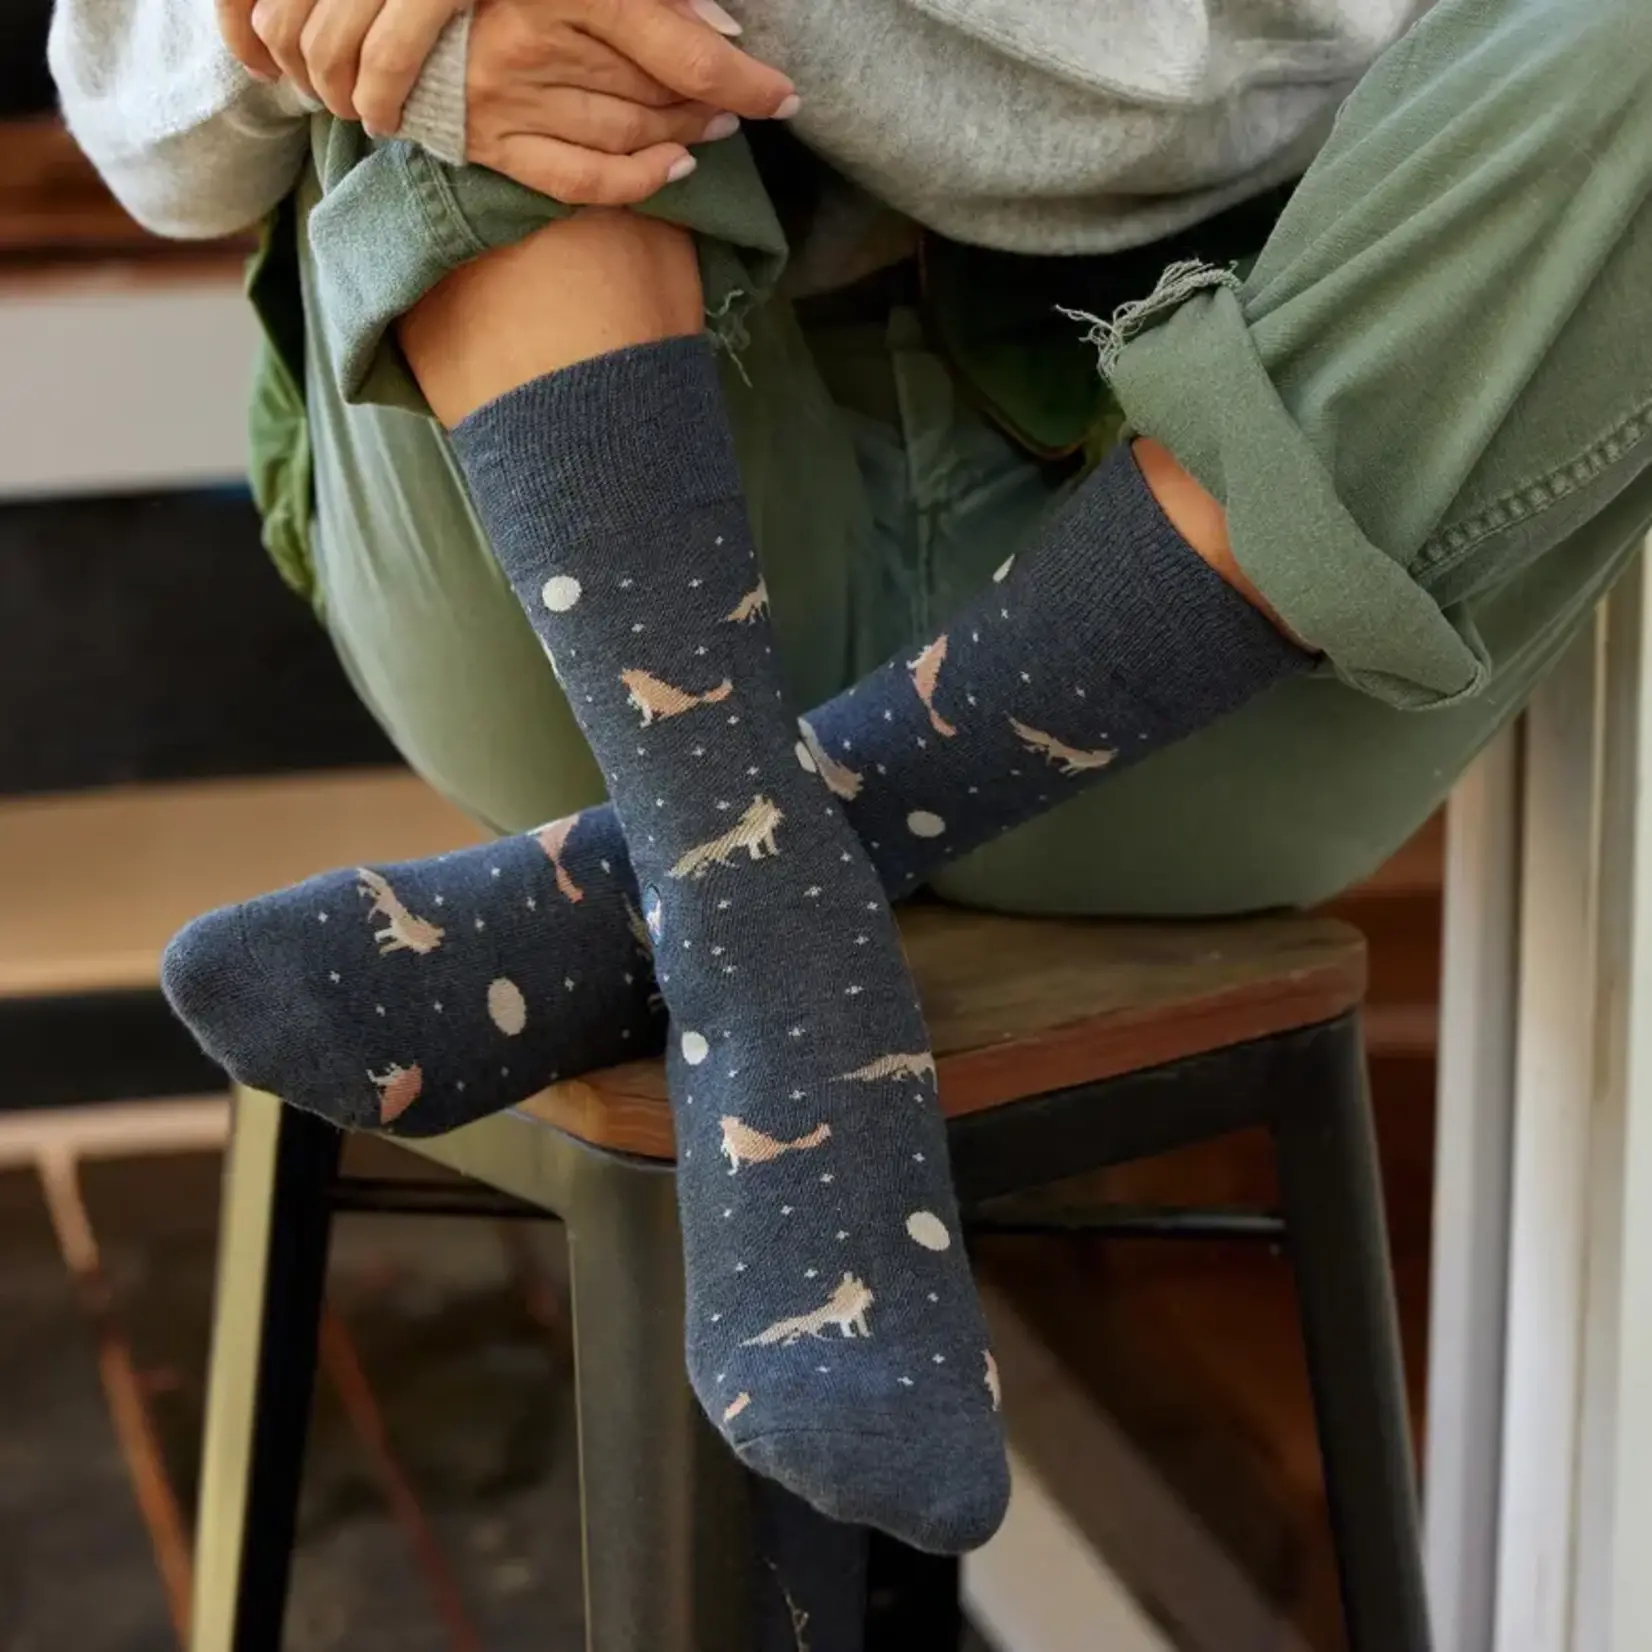 Socks that Protect Wolves | Small